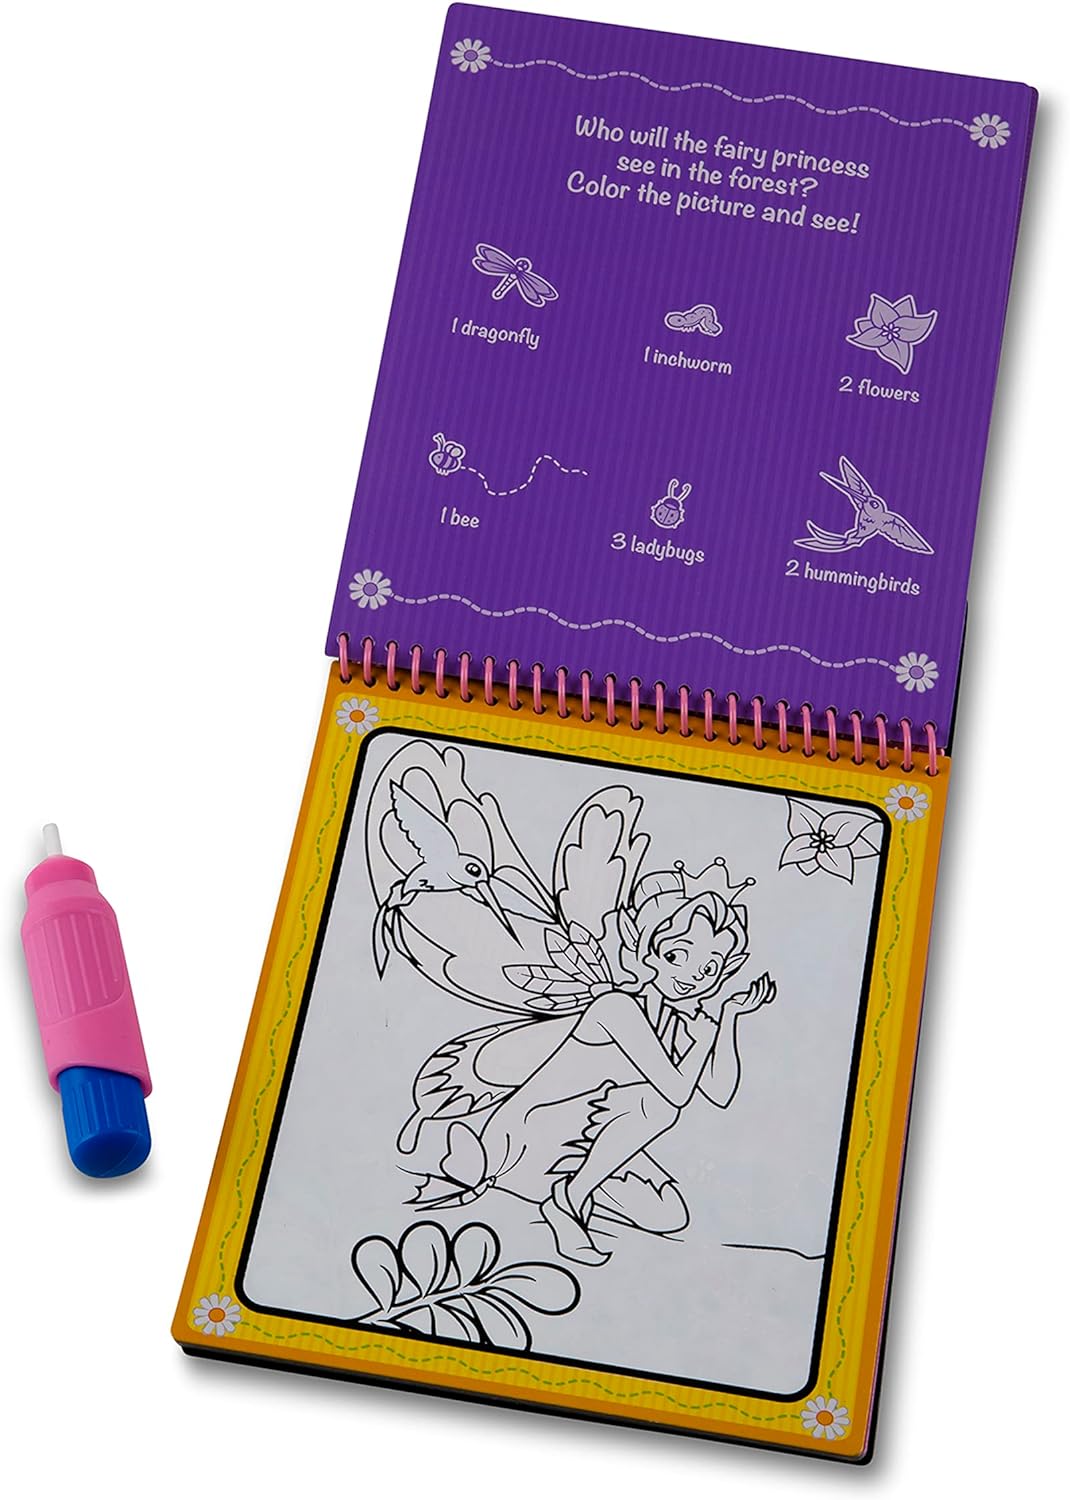 Melissa & Doug On the Go Water Wow! Reusable Water-Reveal Activity Pad - Fairy Tale - Imagine Ink Coloring Book, Stocking Stuffers For Kids Ages 3+, Travel Toys For Toddlers, 2 Piece Set